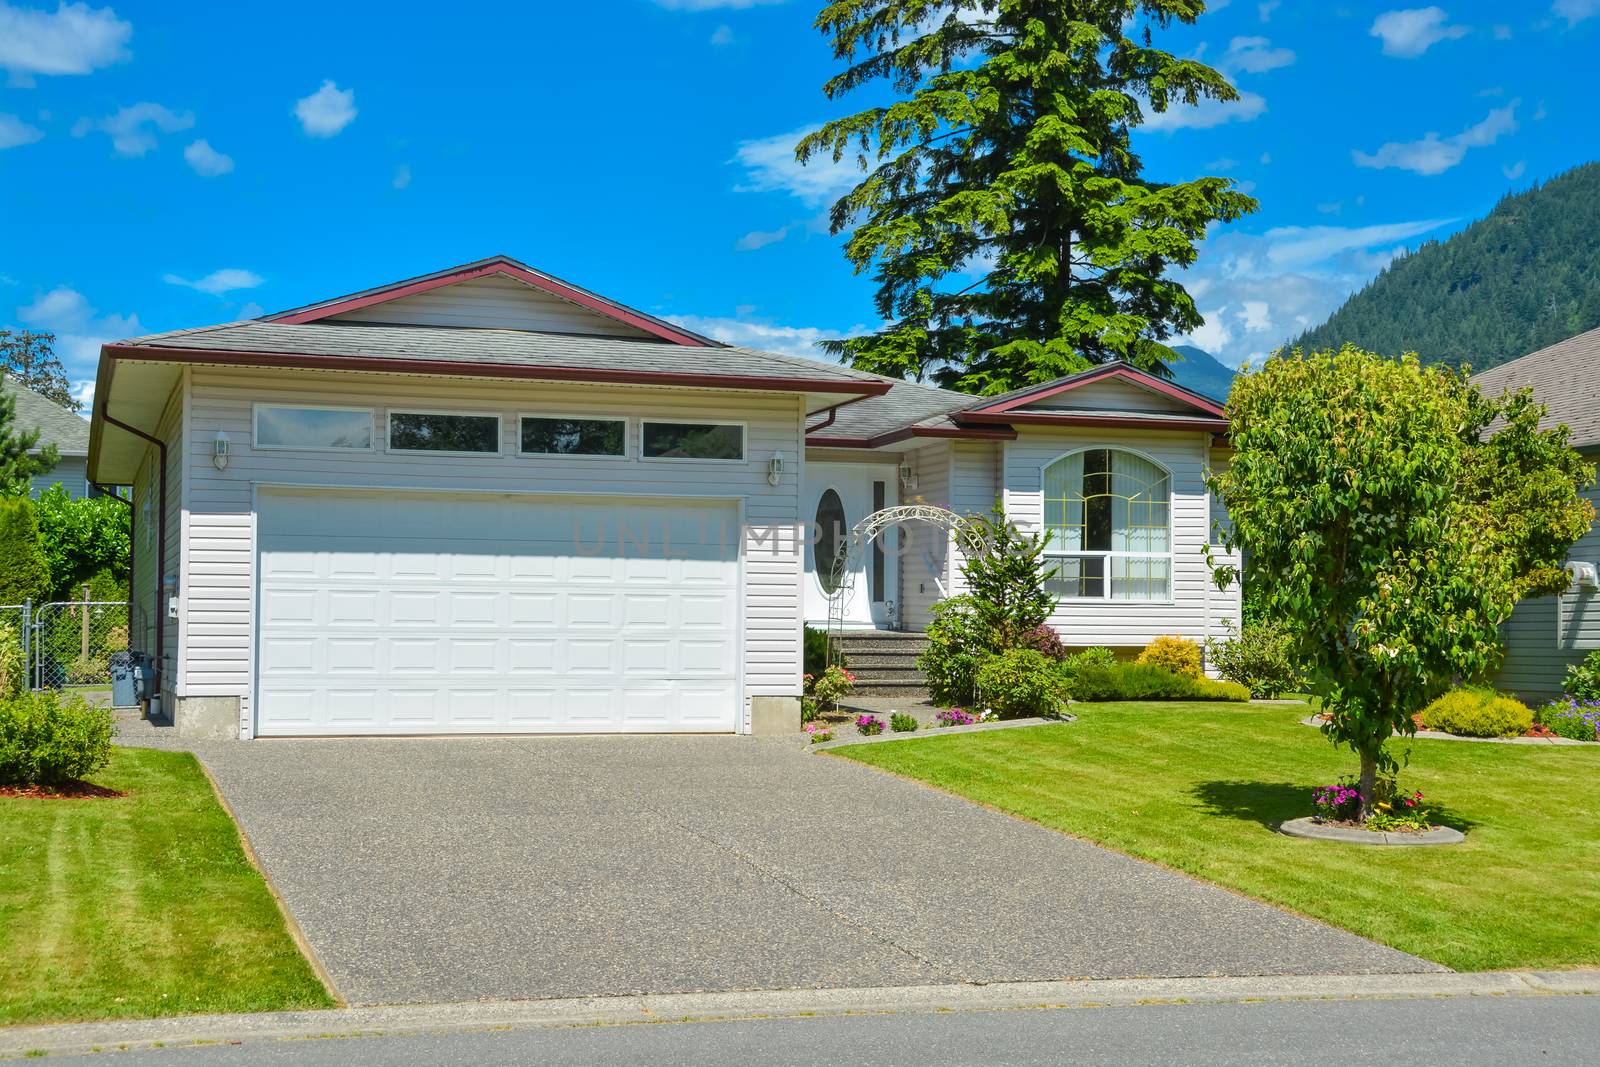 A perfect neighborhood. Nice family house with wide garage door on sunny day in British Columbia